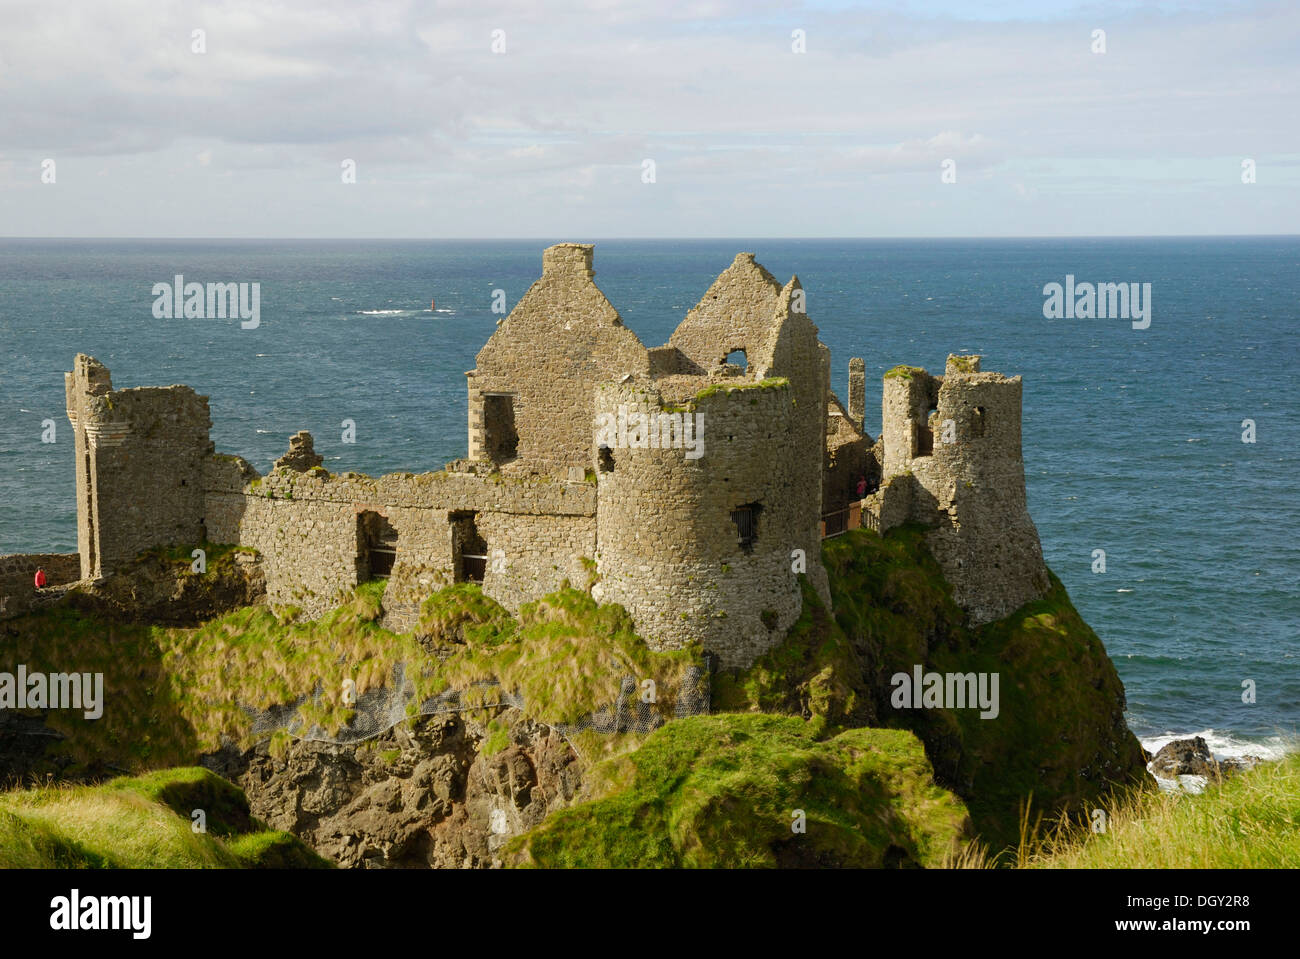 Ancient ruins Dunluce Castle on a cliff on the coast, County Antrim, Northern Ireland, United Kingdom, Europe Stock Photo